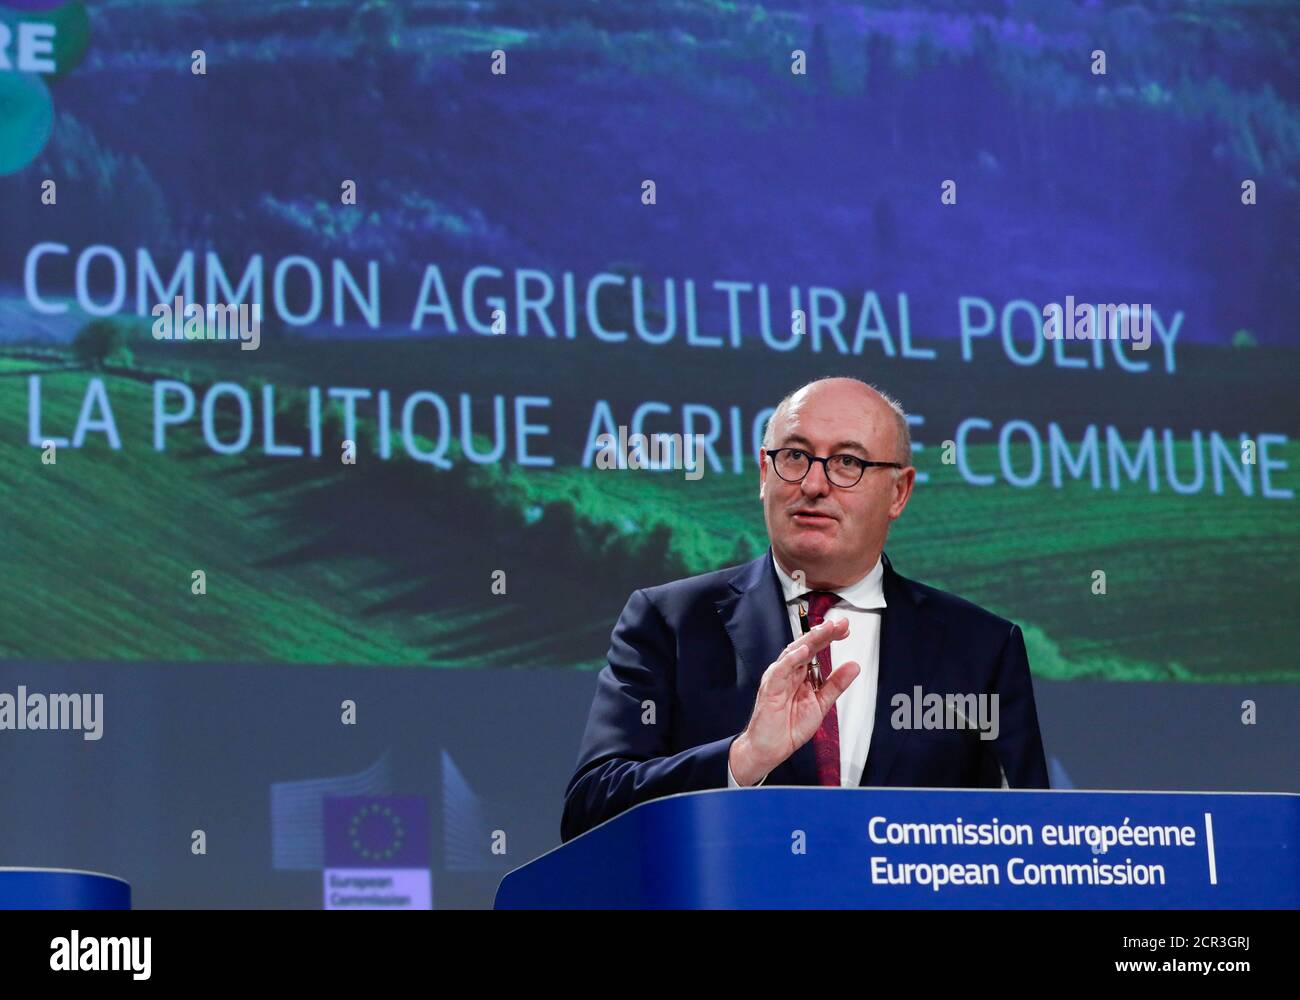 European Commissioner for Agriculture and Rural Development Phil Hogan  holds a news conference on the Common Agricultural Policy (CAP) post-2020,  in Brussels, Belgium June 1, 2018. REUTERS/Yves Herman Stock Photo - Alamy